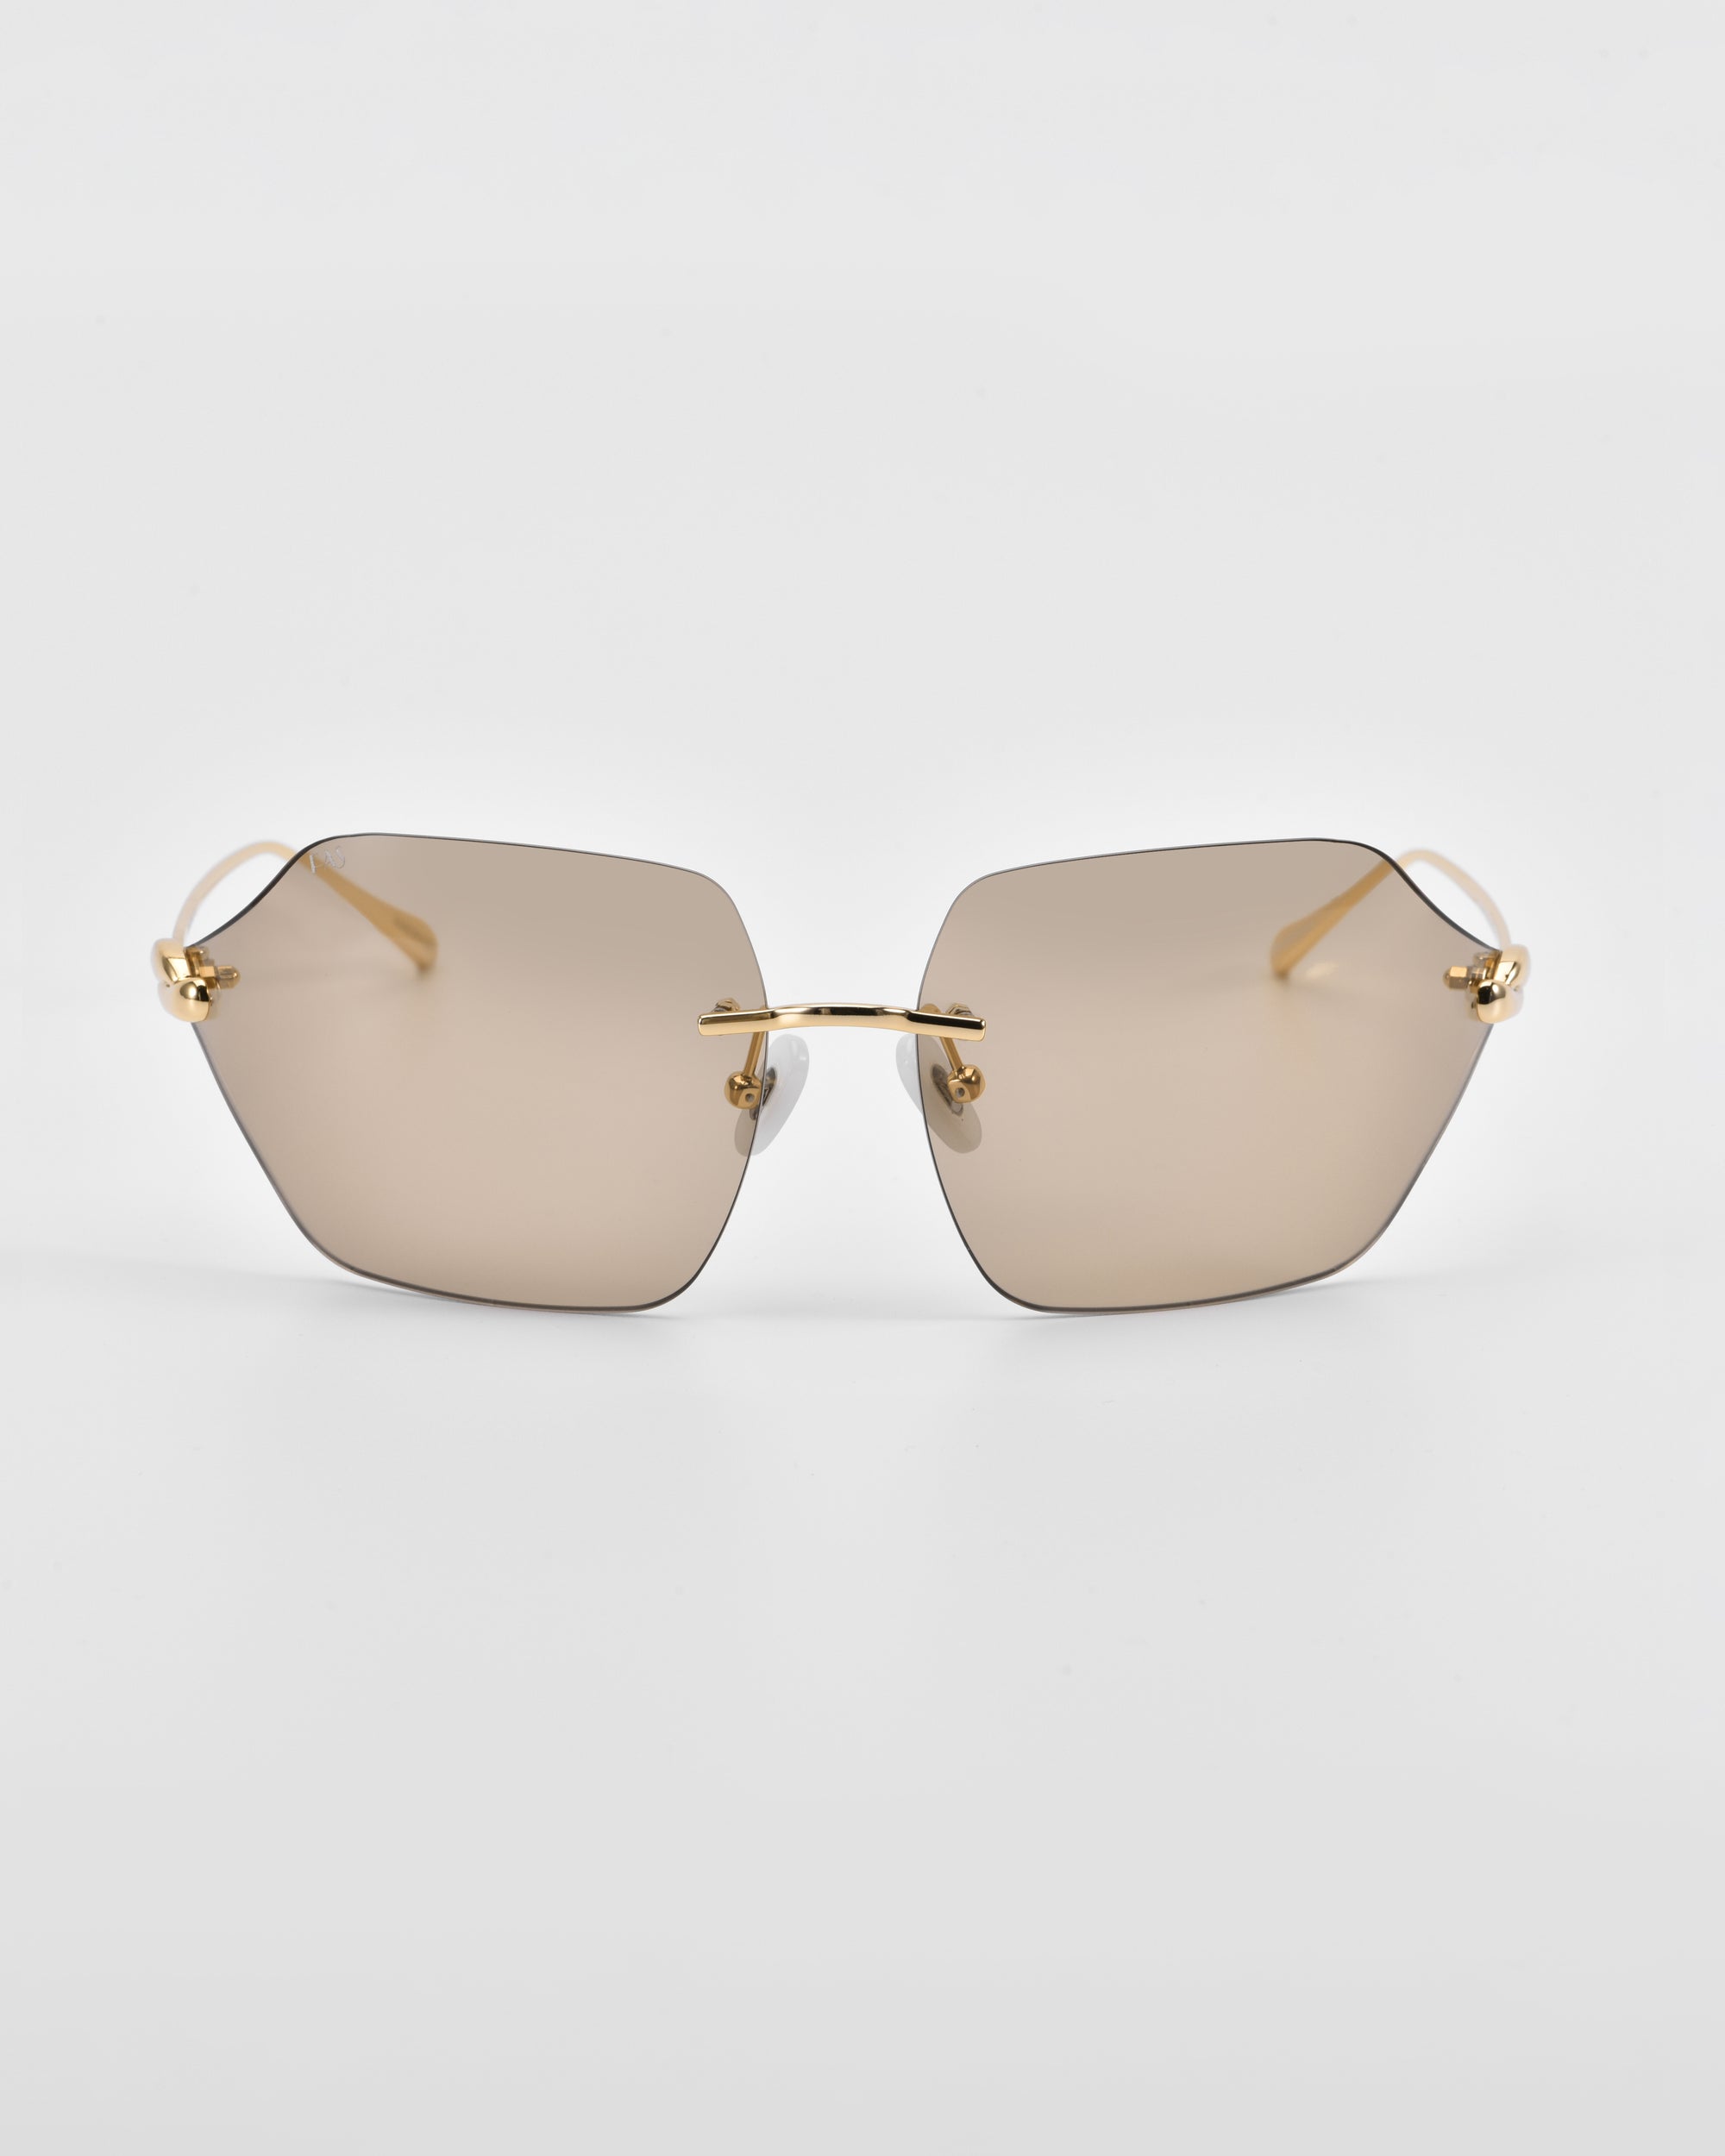 A pair of stylish Serpent II sunglasses from For Art&#39;s Sake® features a frameless wrap lens design with slightly tinted, polygonal lenses and thin, golden arms. Displayed against a plain white background, the nose bridge also boasts 18-karat gold plating, accentuating the modern design of the eyewear.